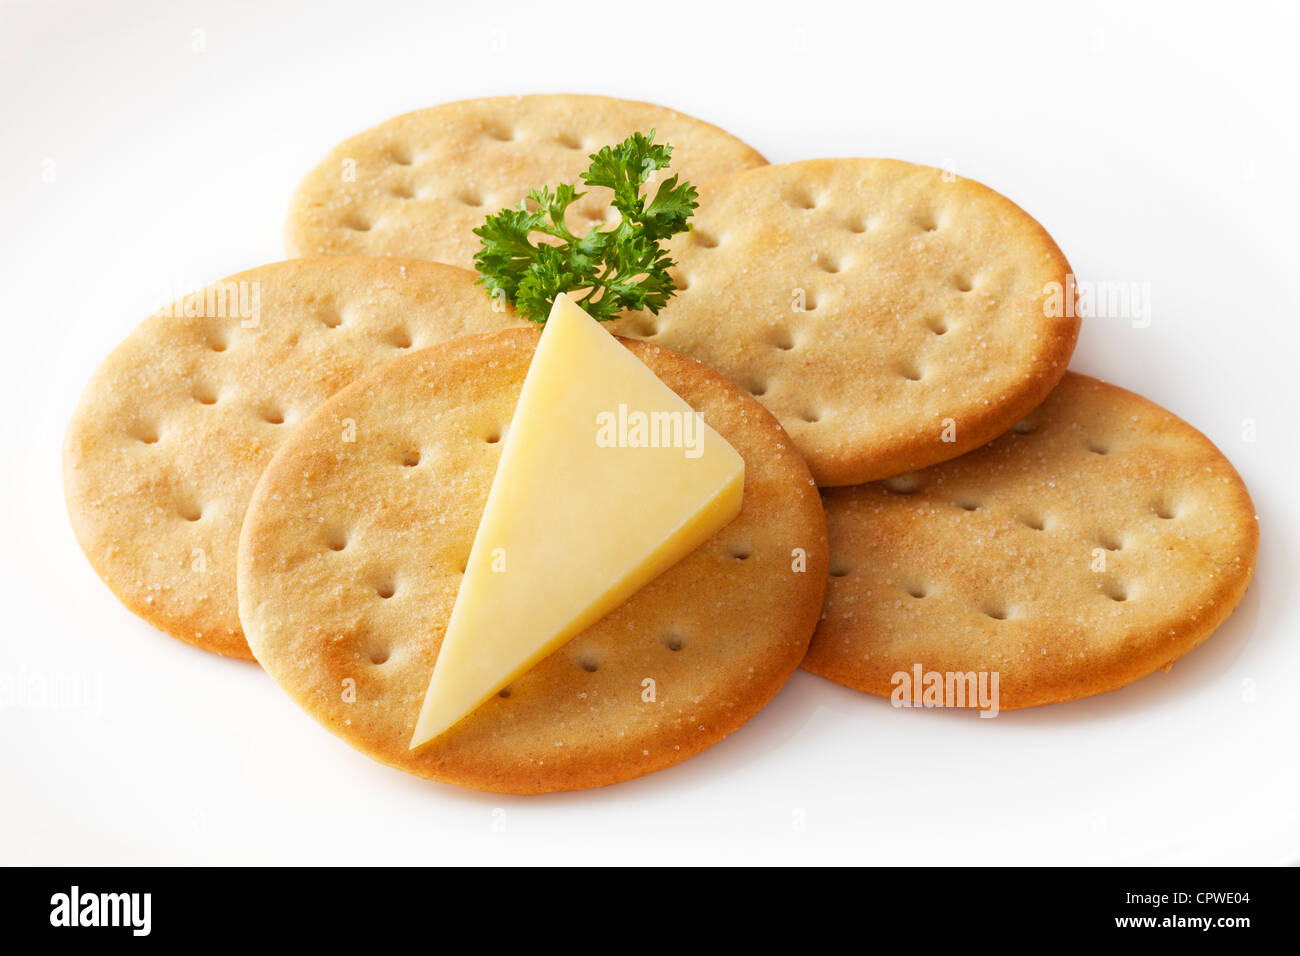 Classic snack, cheddar cheese and crisp crackers on a white plate garnished with parsley. Clipping path included. Stock Photo